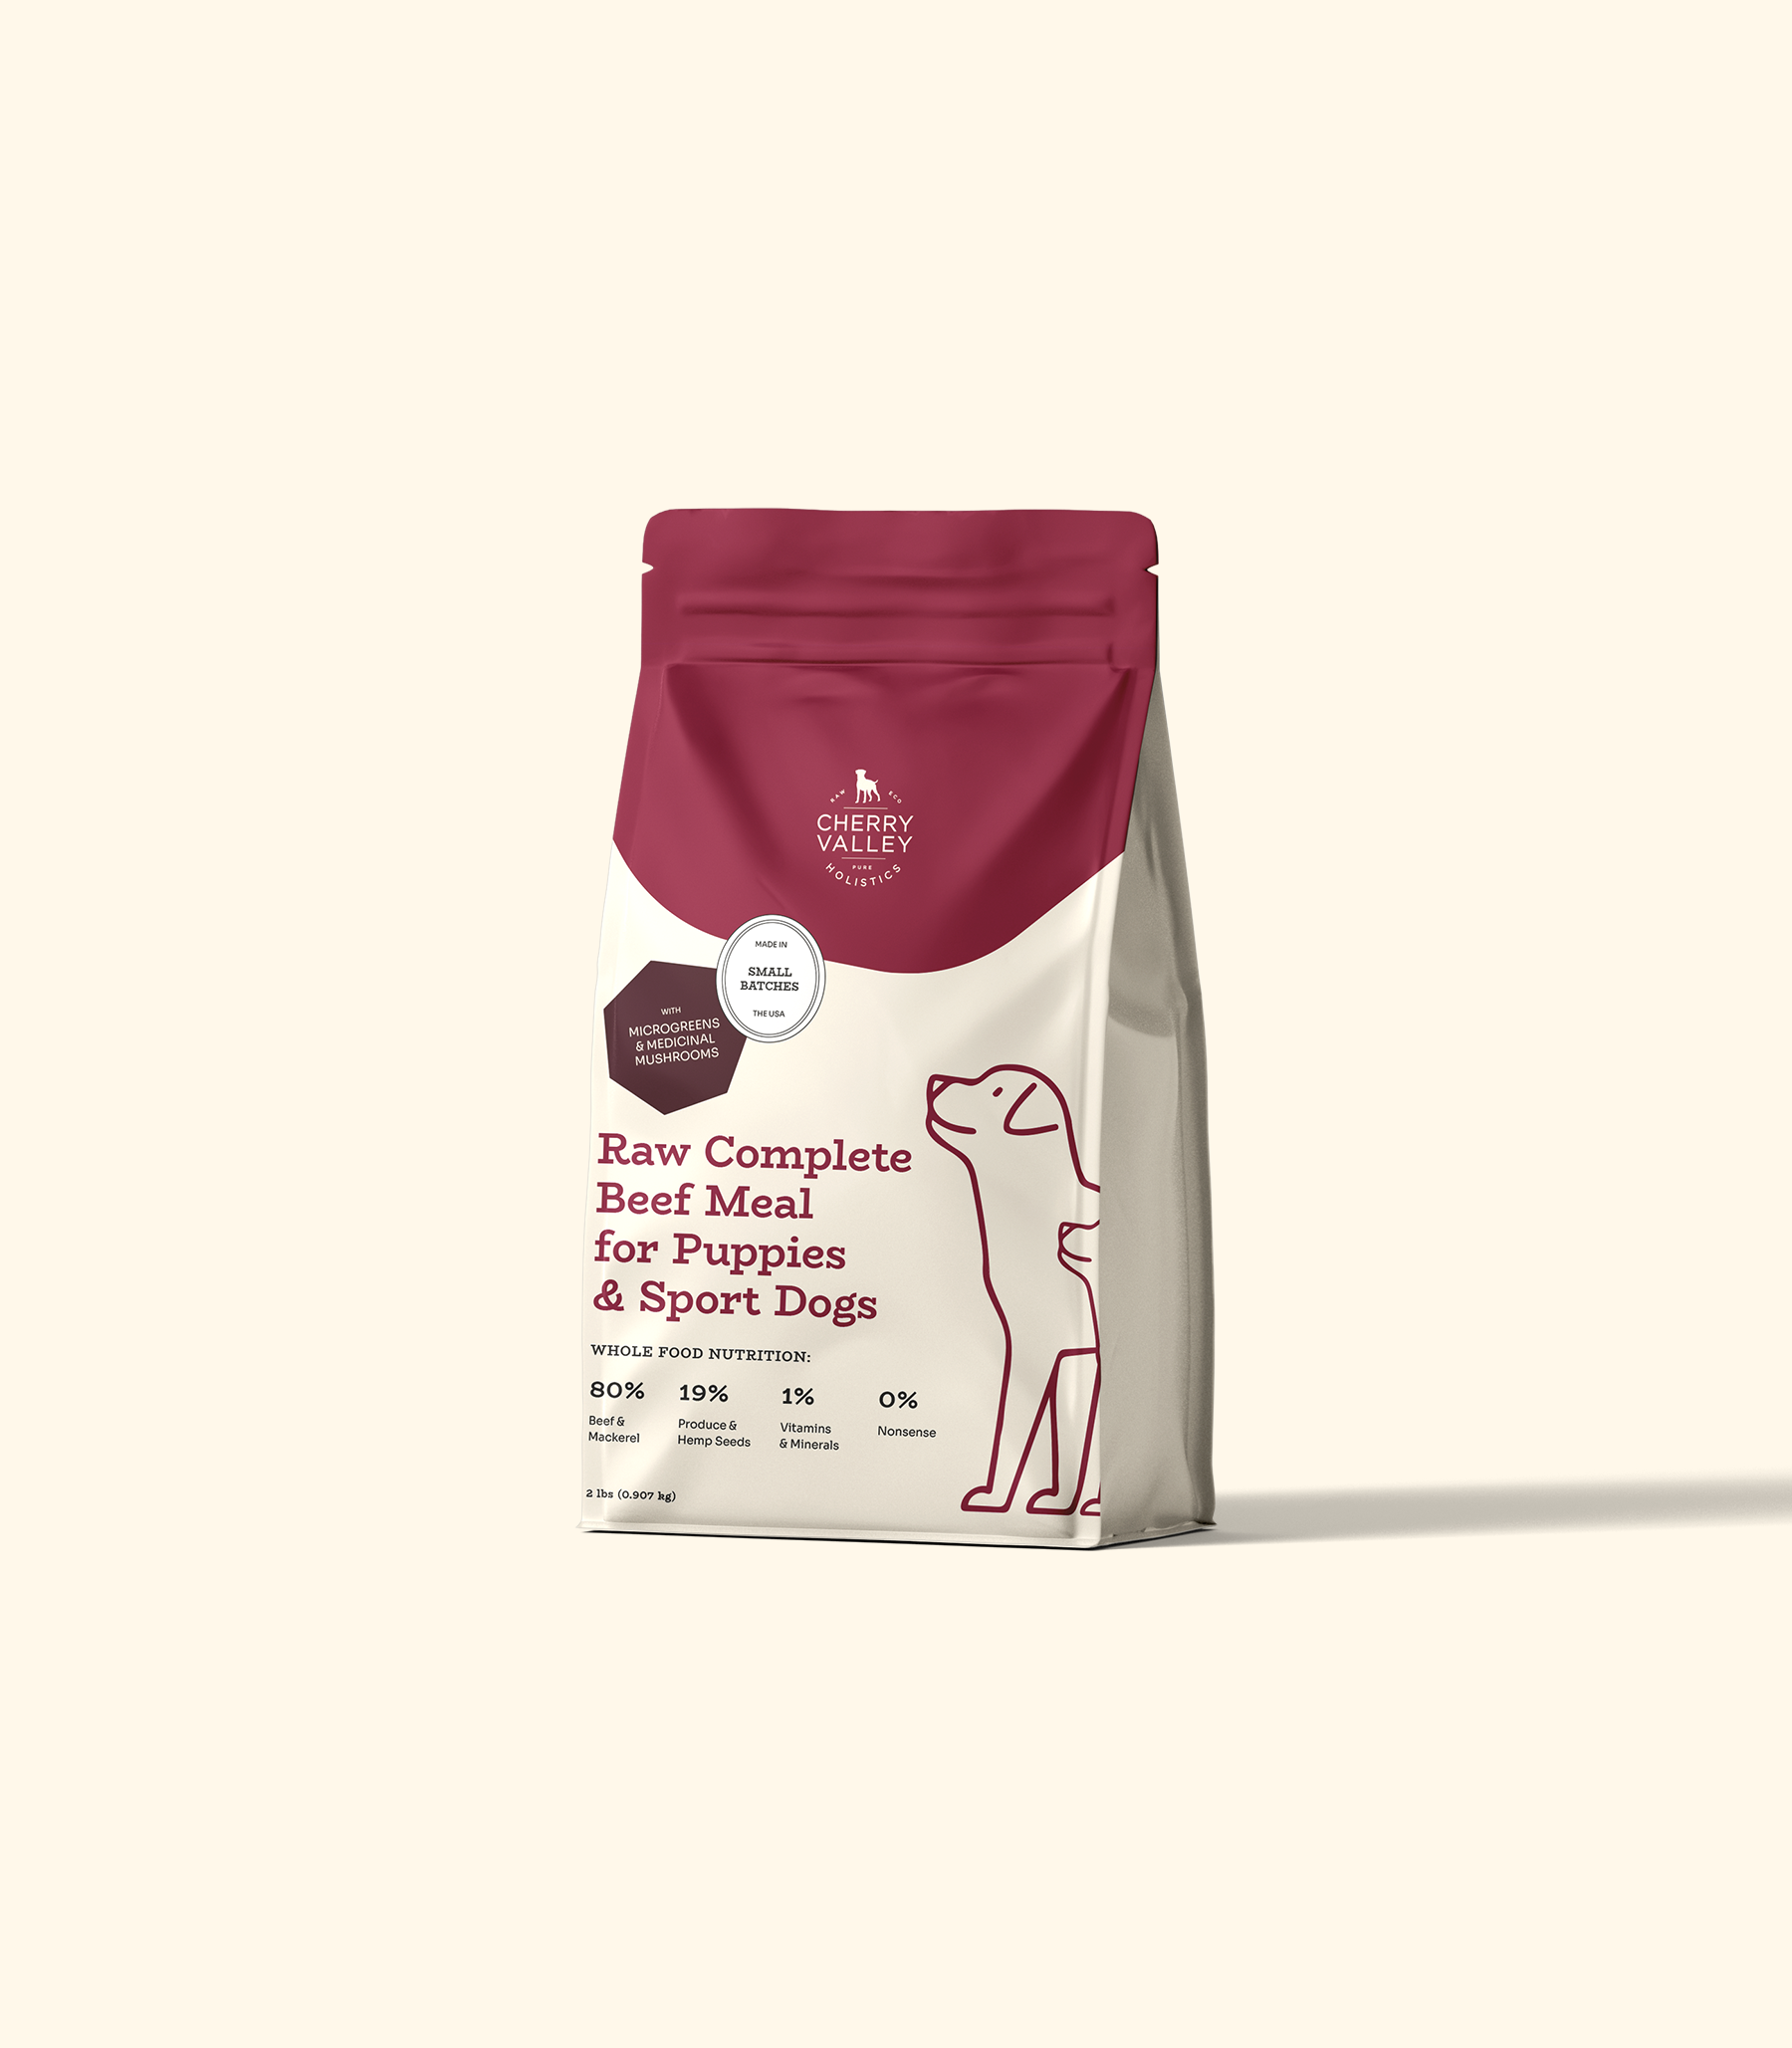 Raw Complete Beef Meal for Puppies & Sport Dogs